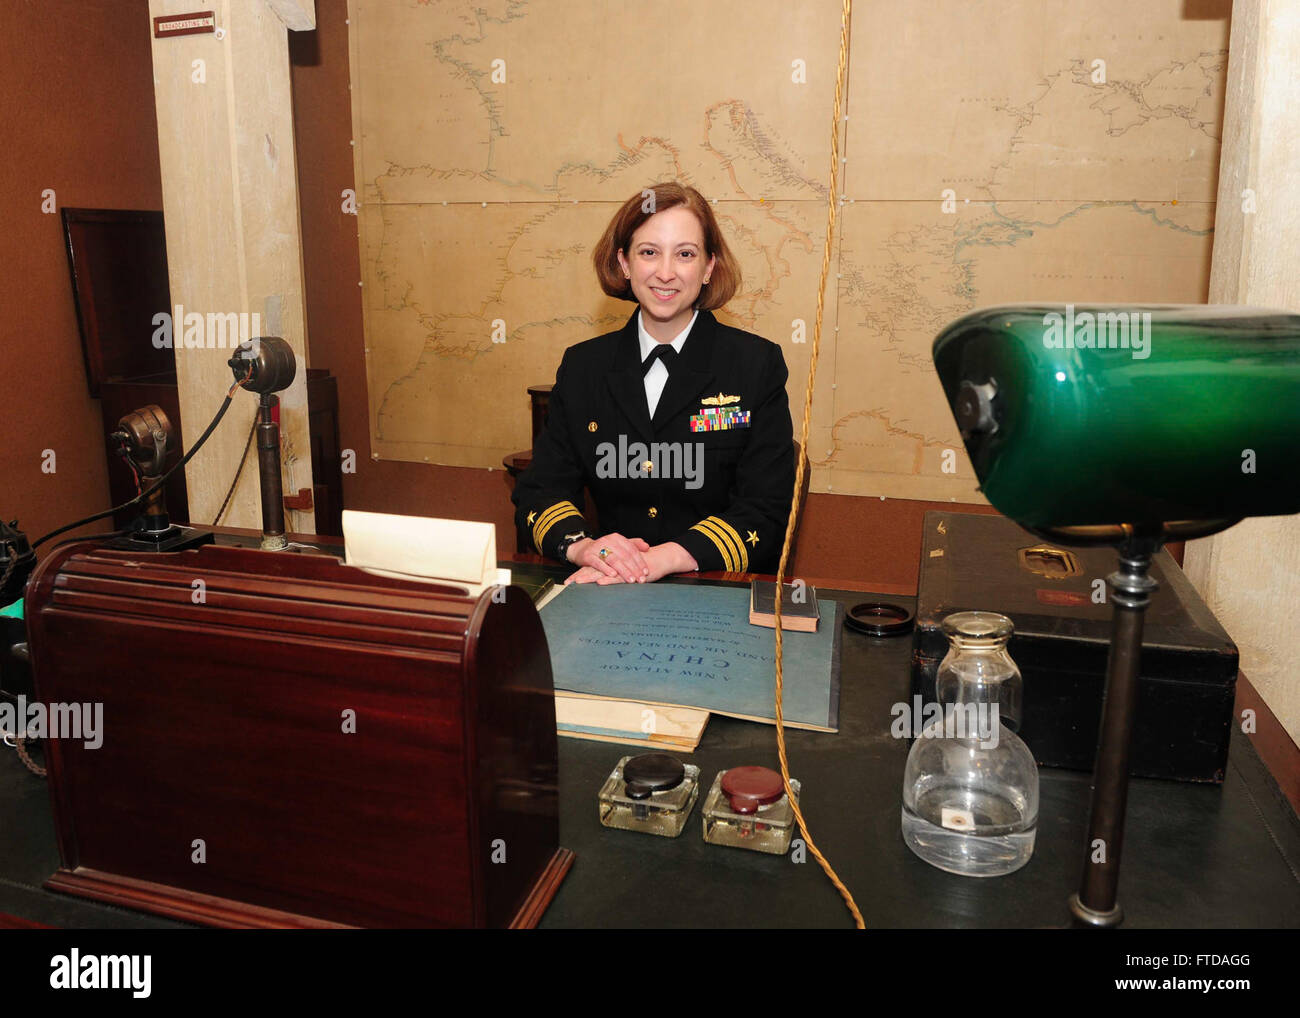 150324-N-BD333-088 PORTSMOUTH, United Kingdom (March 24, 2015) Cmdr. Christine O'Connell, commanding officer of the Arleigh-Burke class guided missile destroyer USS Winston S. Churchill (DDG 81), sits in Sir Winston S. Churchill’s chair in his office-bedroom during a tour of the Churchill War Rooms museum in London, March 24, 2015. Theodore Roosevelt Carrier Strike Group (TRCSG) leadership also attended the tour of the museum. Churchill, home-ported in Norfolk, is conducting naval operations in the U.S. 6th Fleet area of operations in support of U.S. national security interests in Europe. (U.S Stock Photo